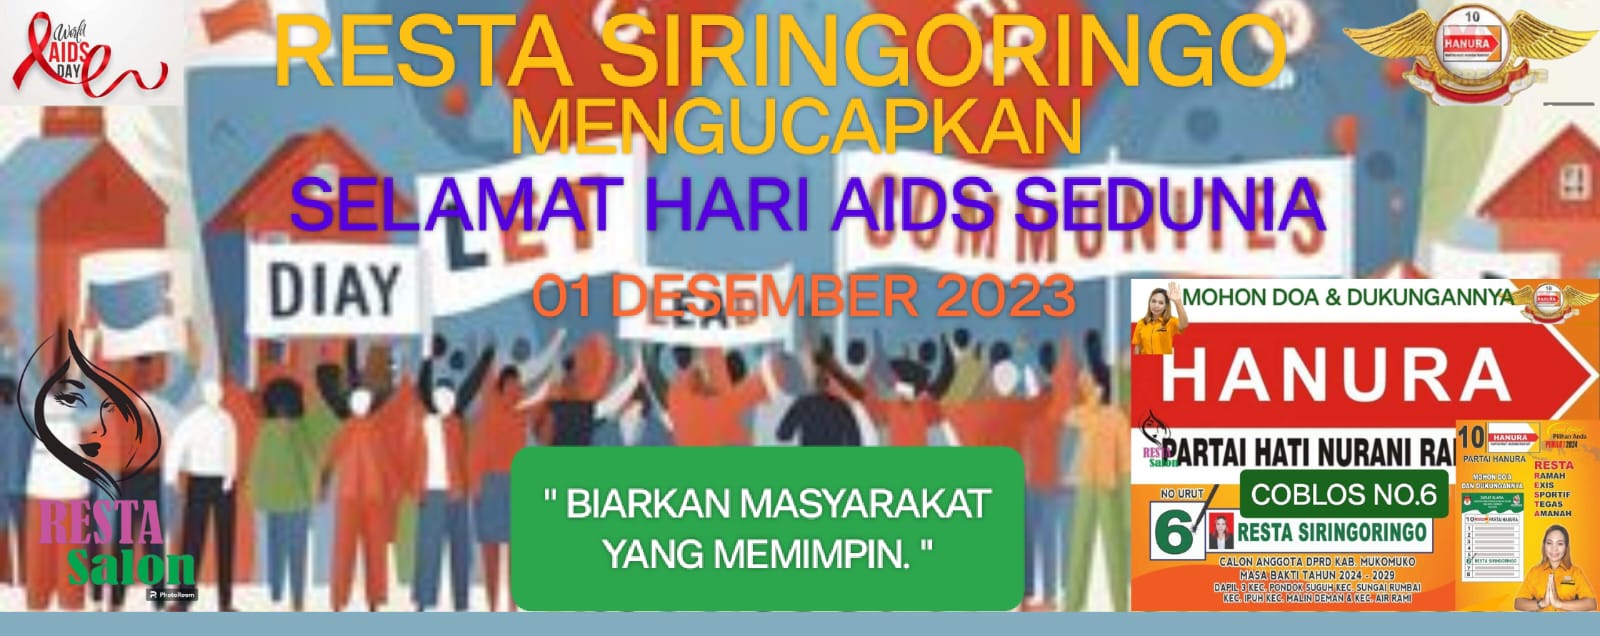 AIDS DAY